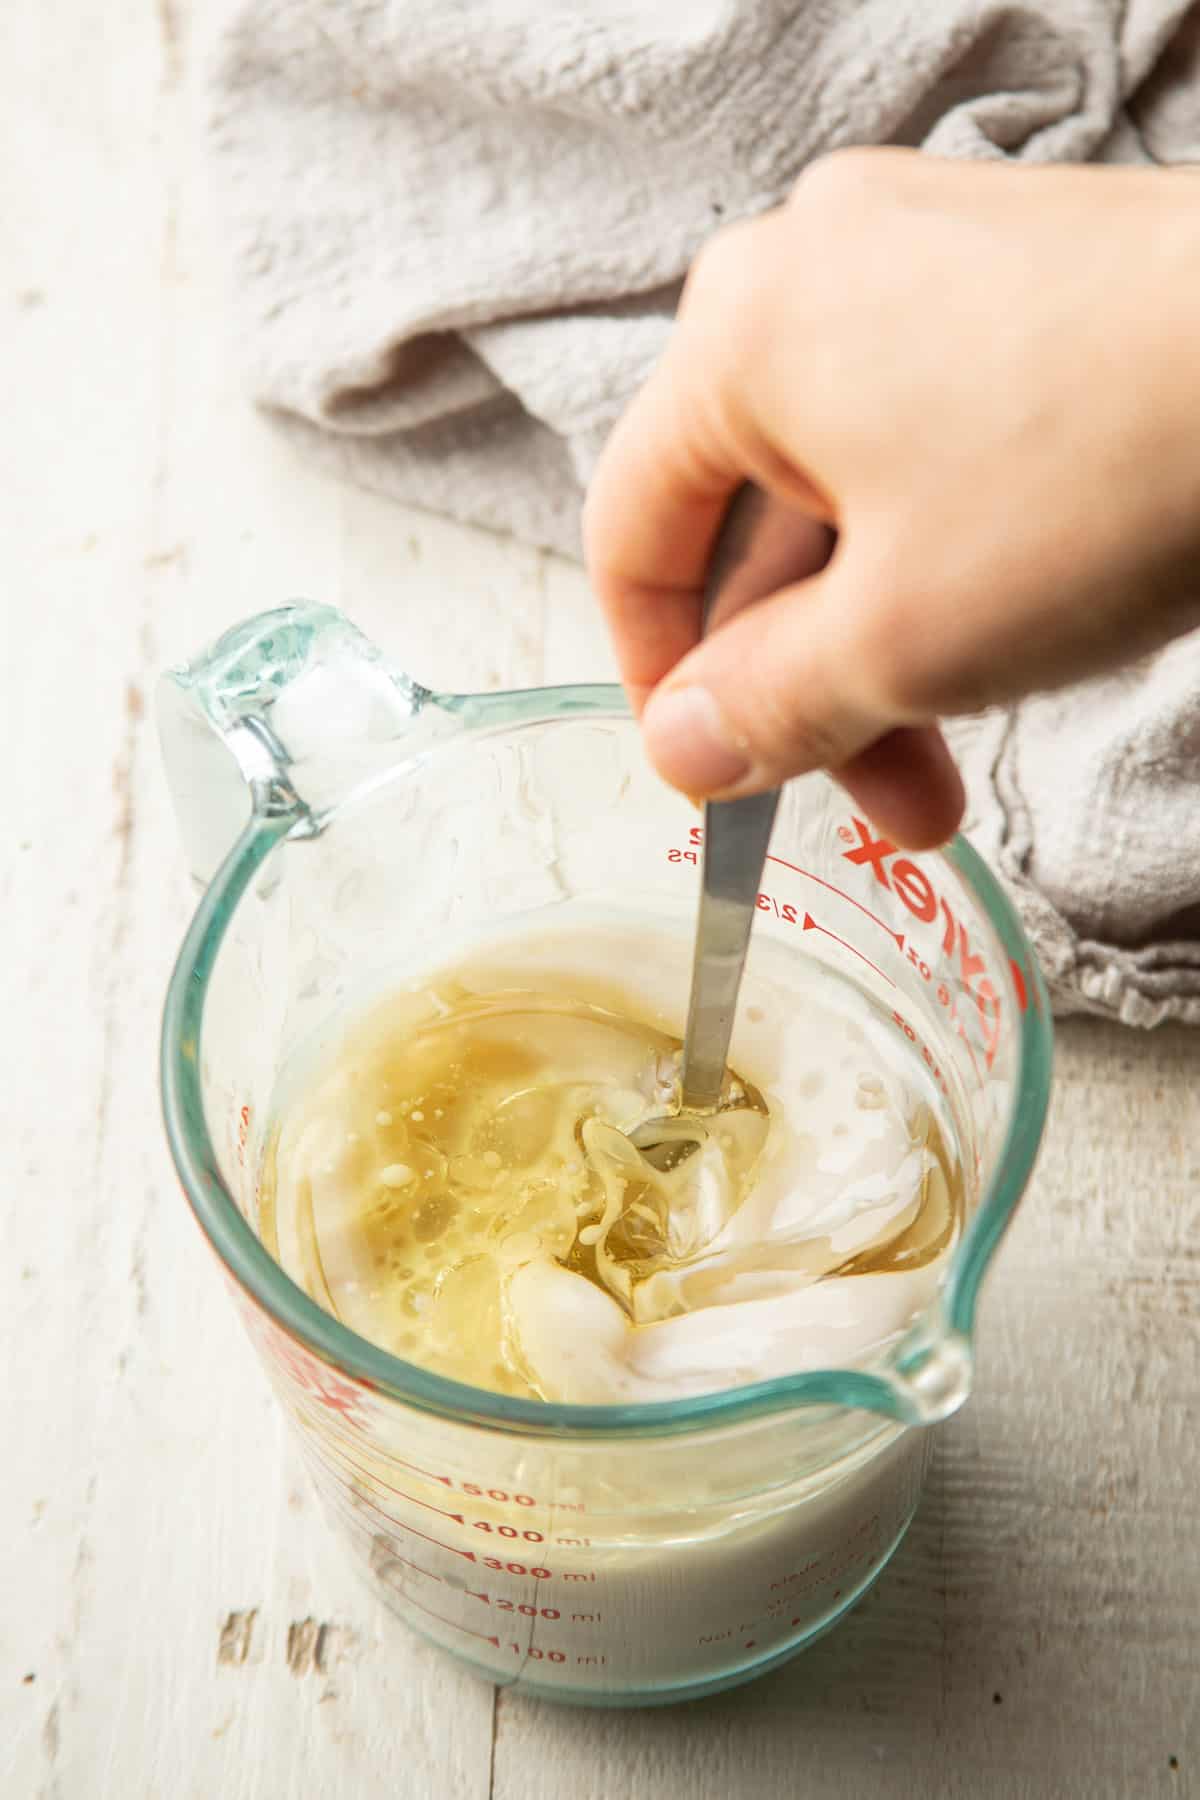 Stir the oil by hand into a measuring cup filled with dairy-free milk.